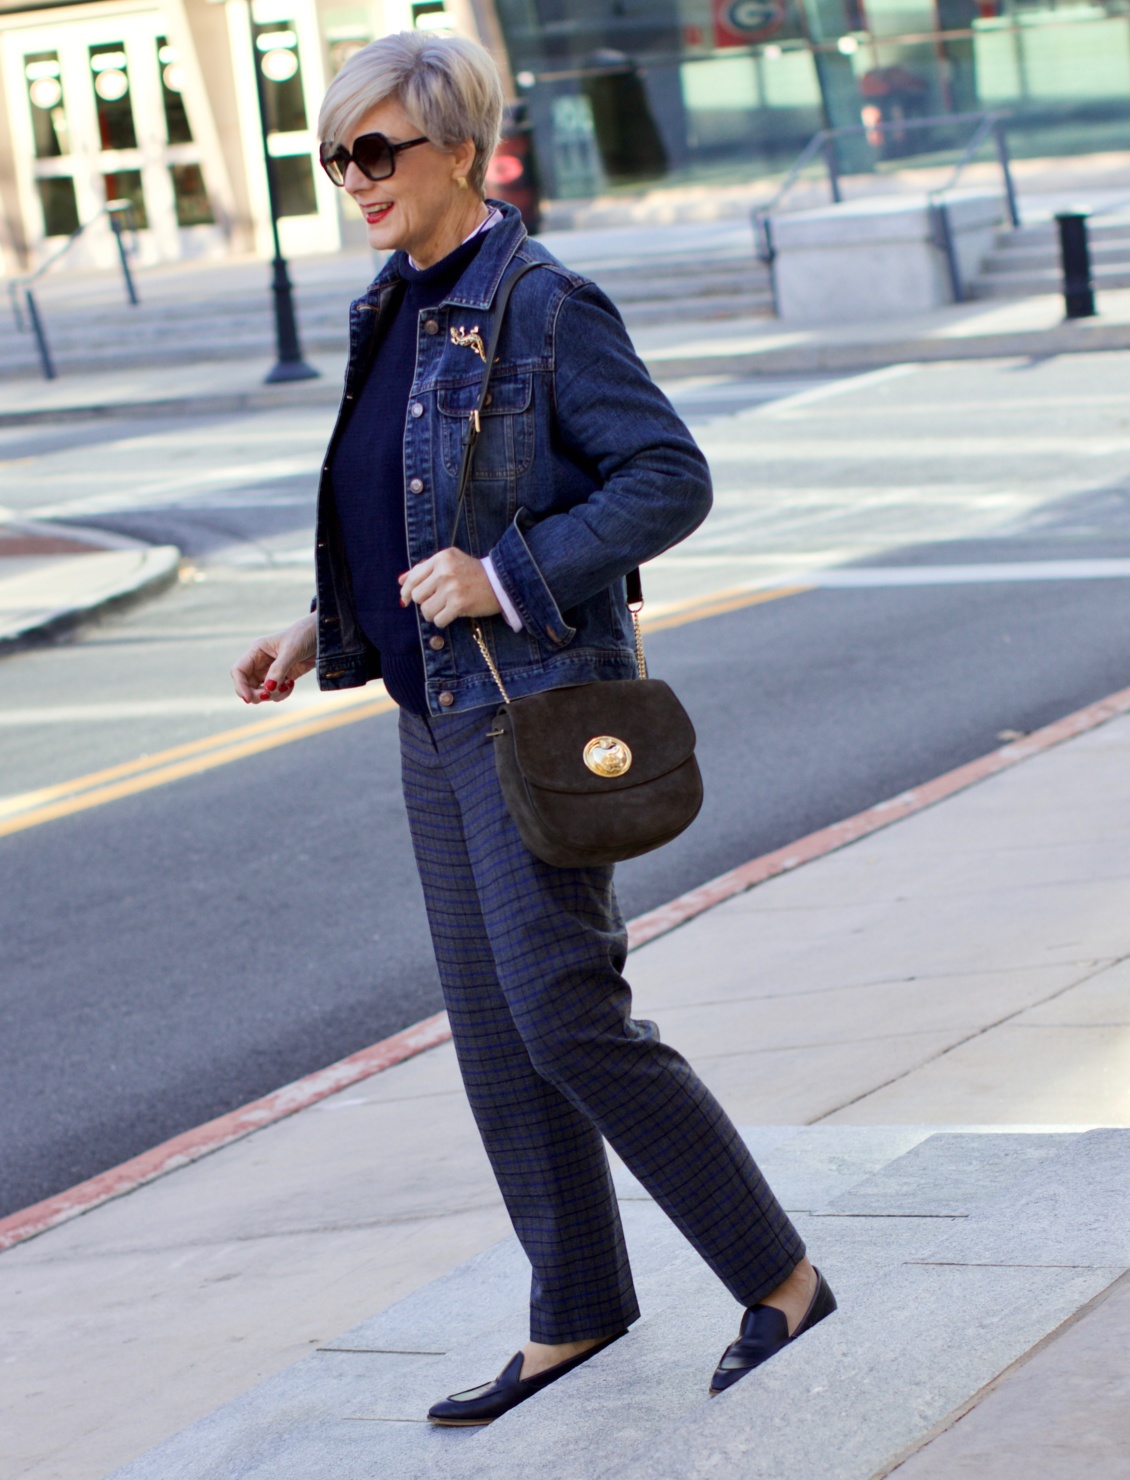 beth from style at a certain age wears a jean jacket, plaid pants, navy blue roll neck sweater, striped shirt, and navy blue loafers